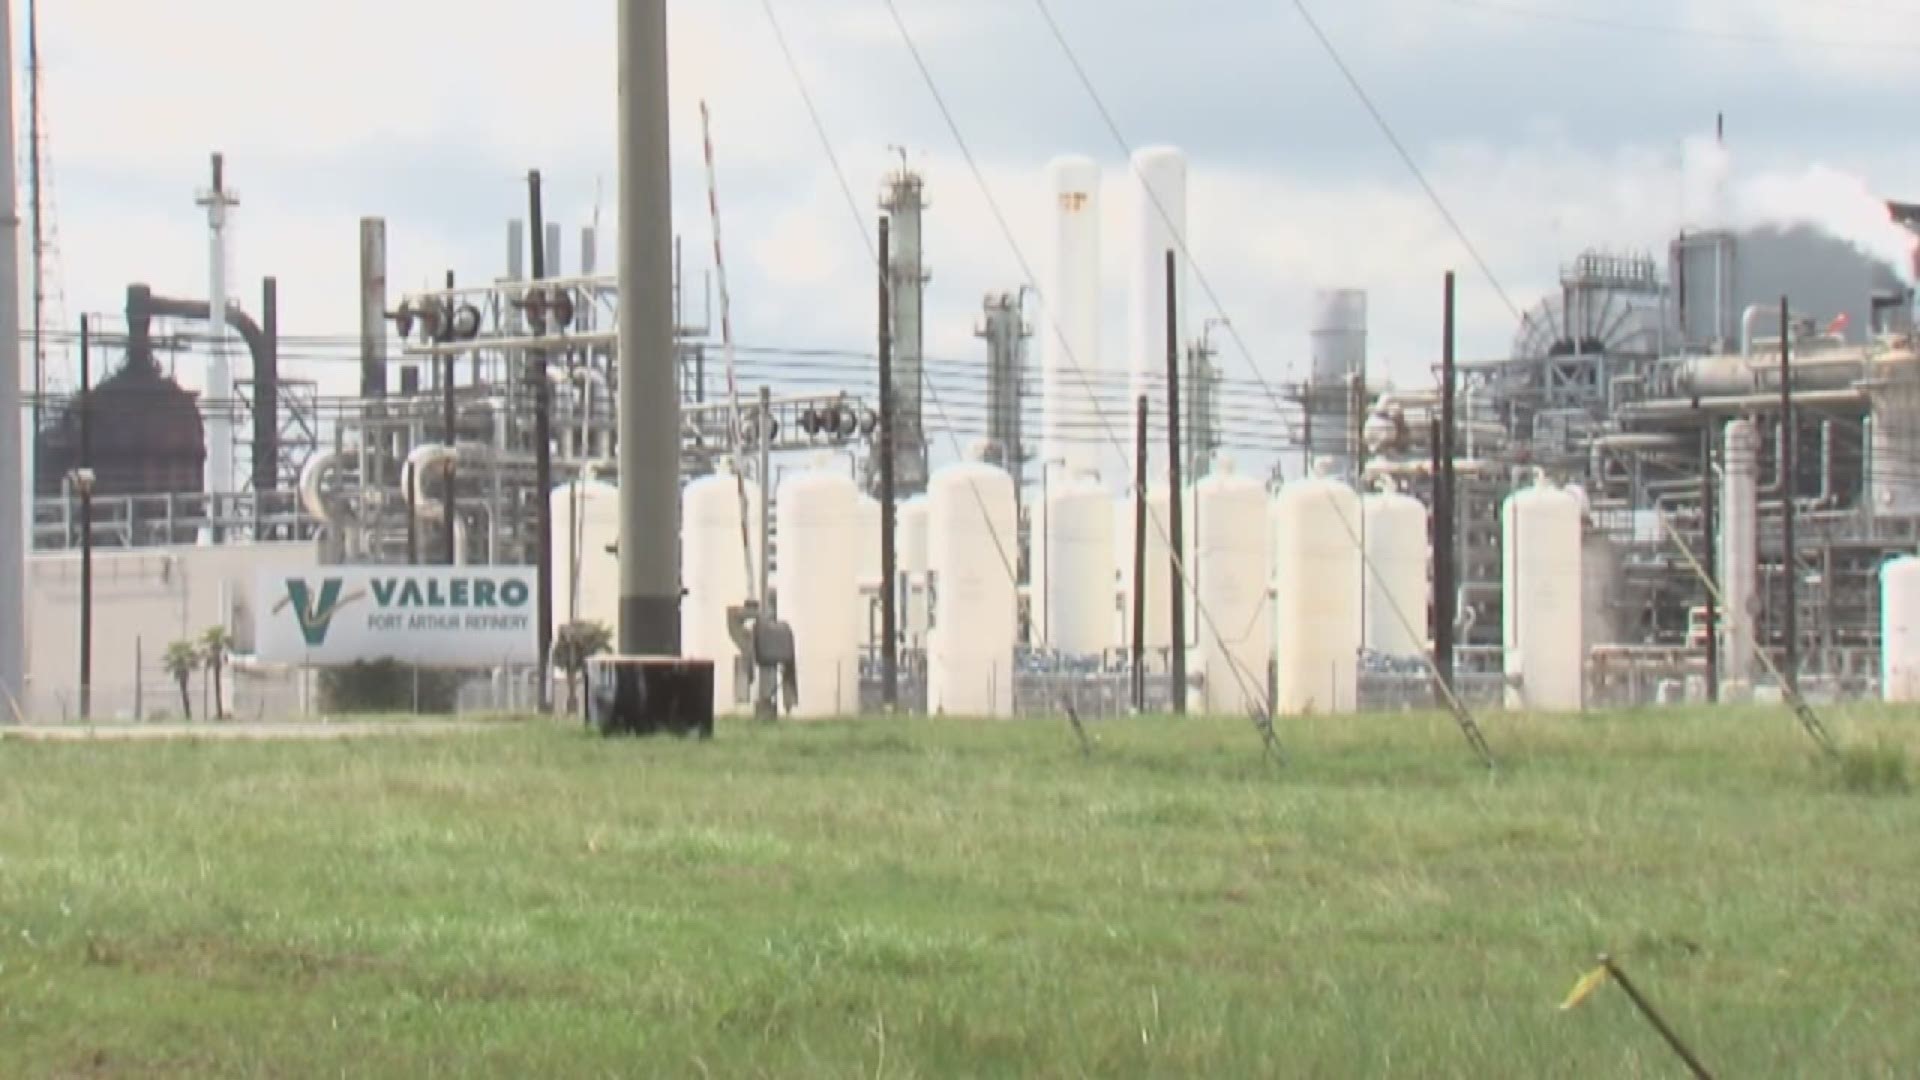 The Texas Attorney General's office is suing Valero for an alleged 1.8 million pounds of pollution over the last five years.